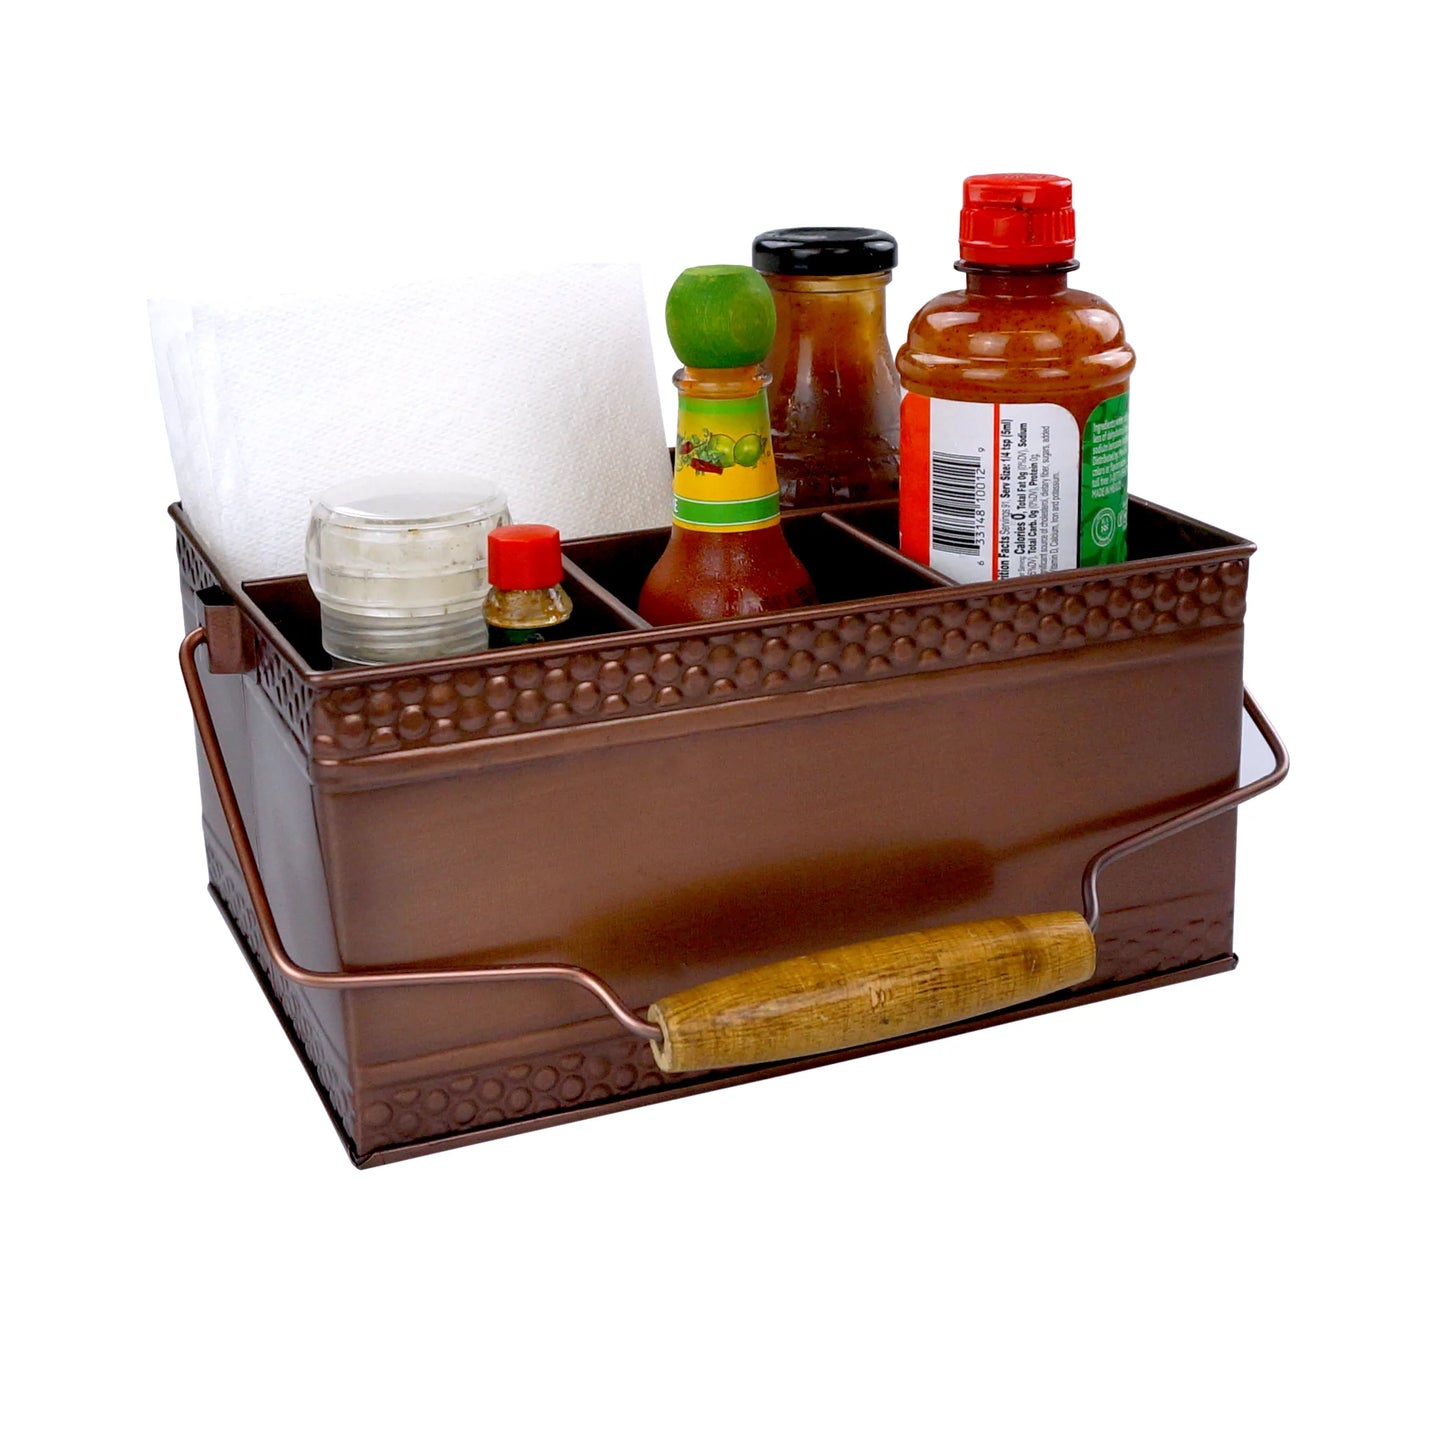 Large condiment holder made of glossy easy to clean metal with easy to grip large wooden handle.  Includes 4 compartments to hold condiments, utensils, napkins, or other party essentials.